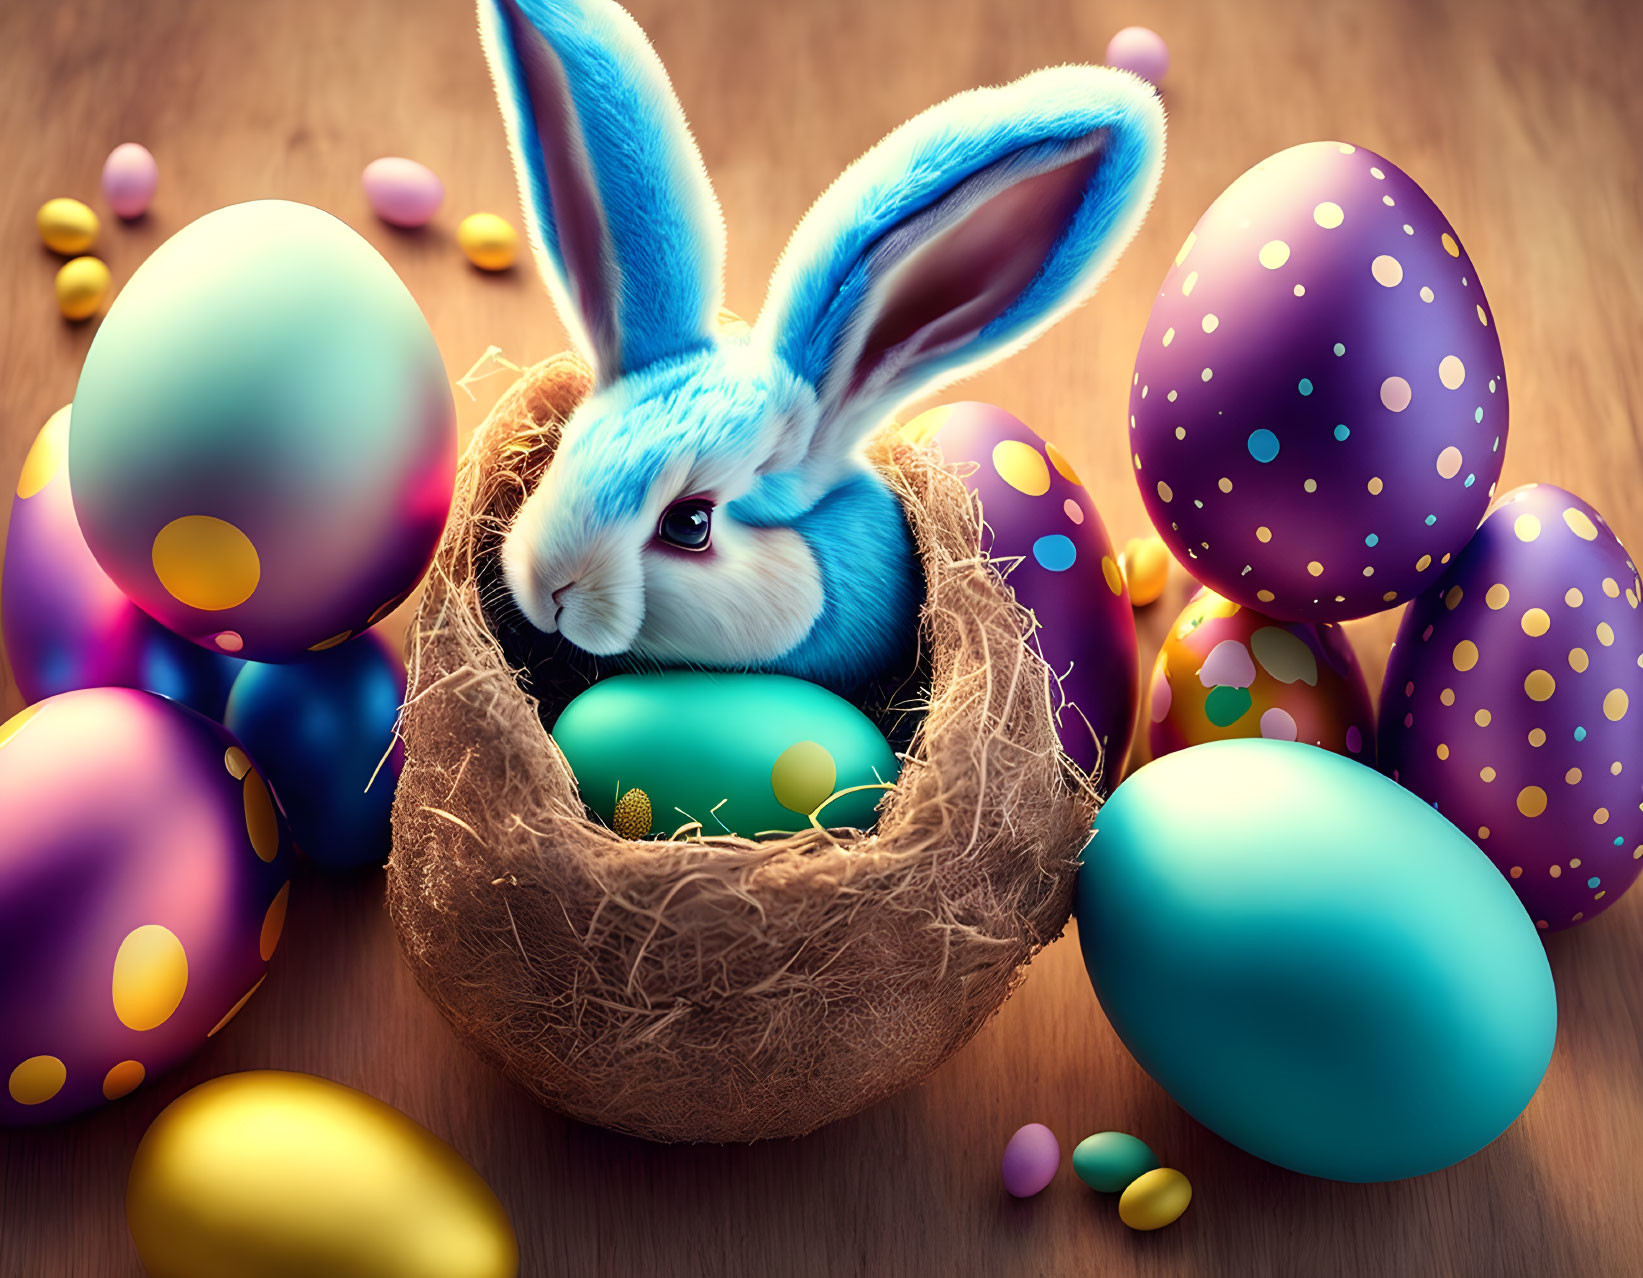 Vibrant Easter illustration: blue rabbit in nest with decorated eggs